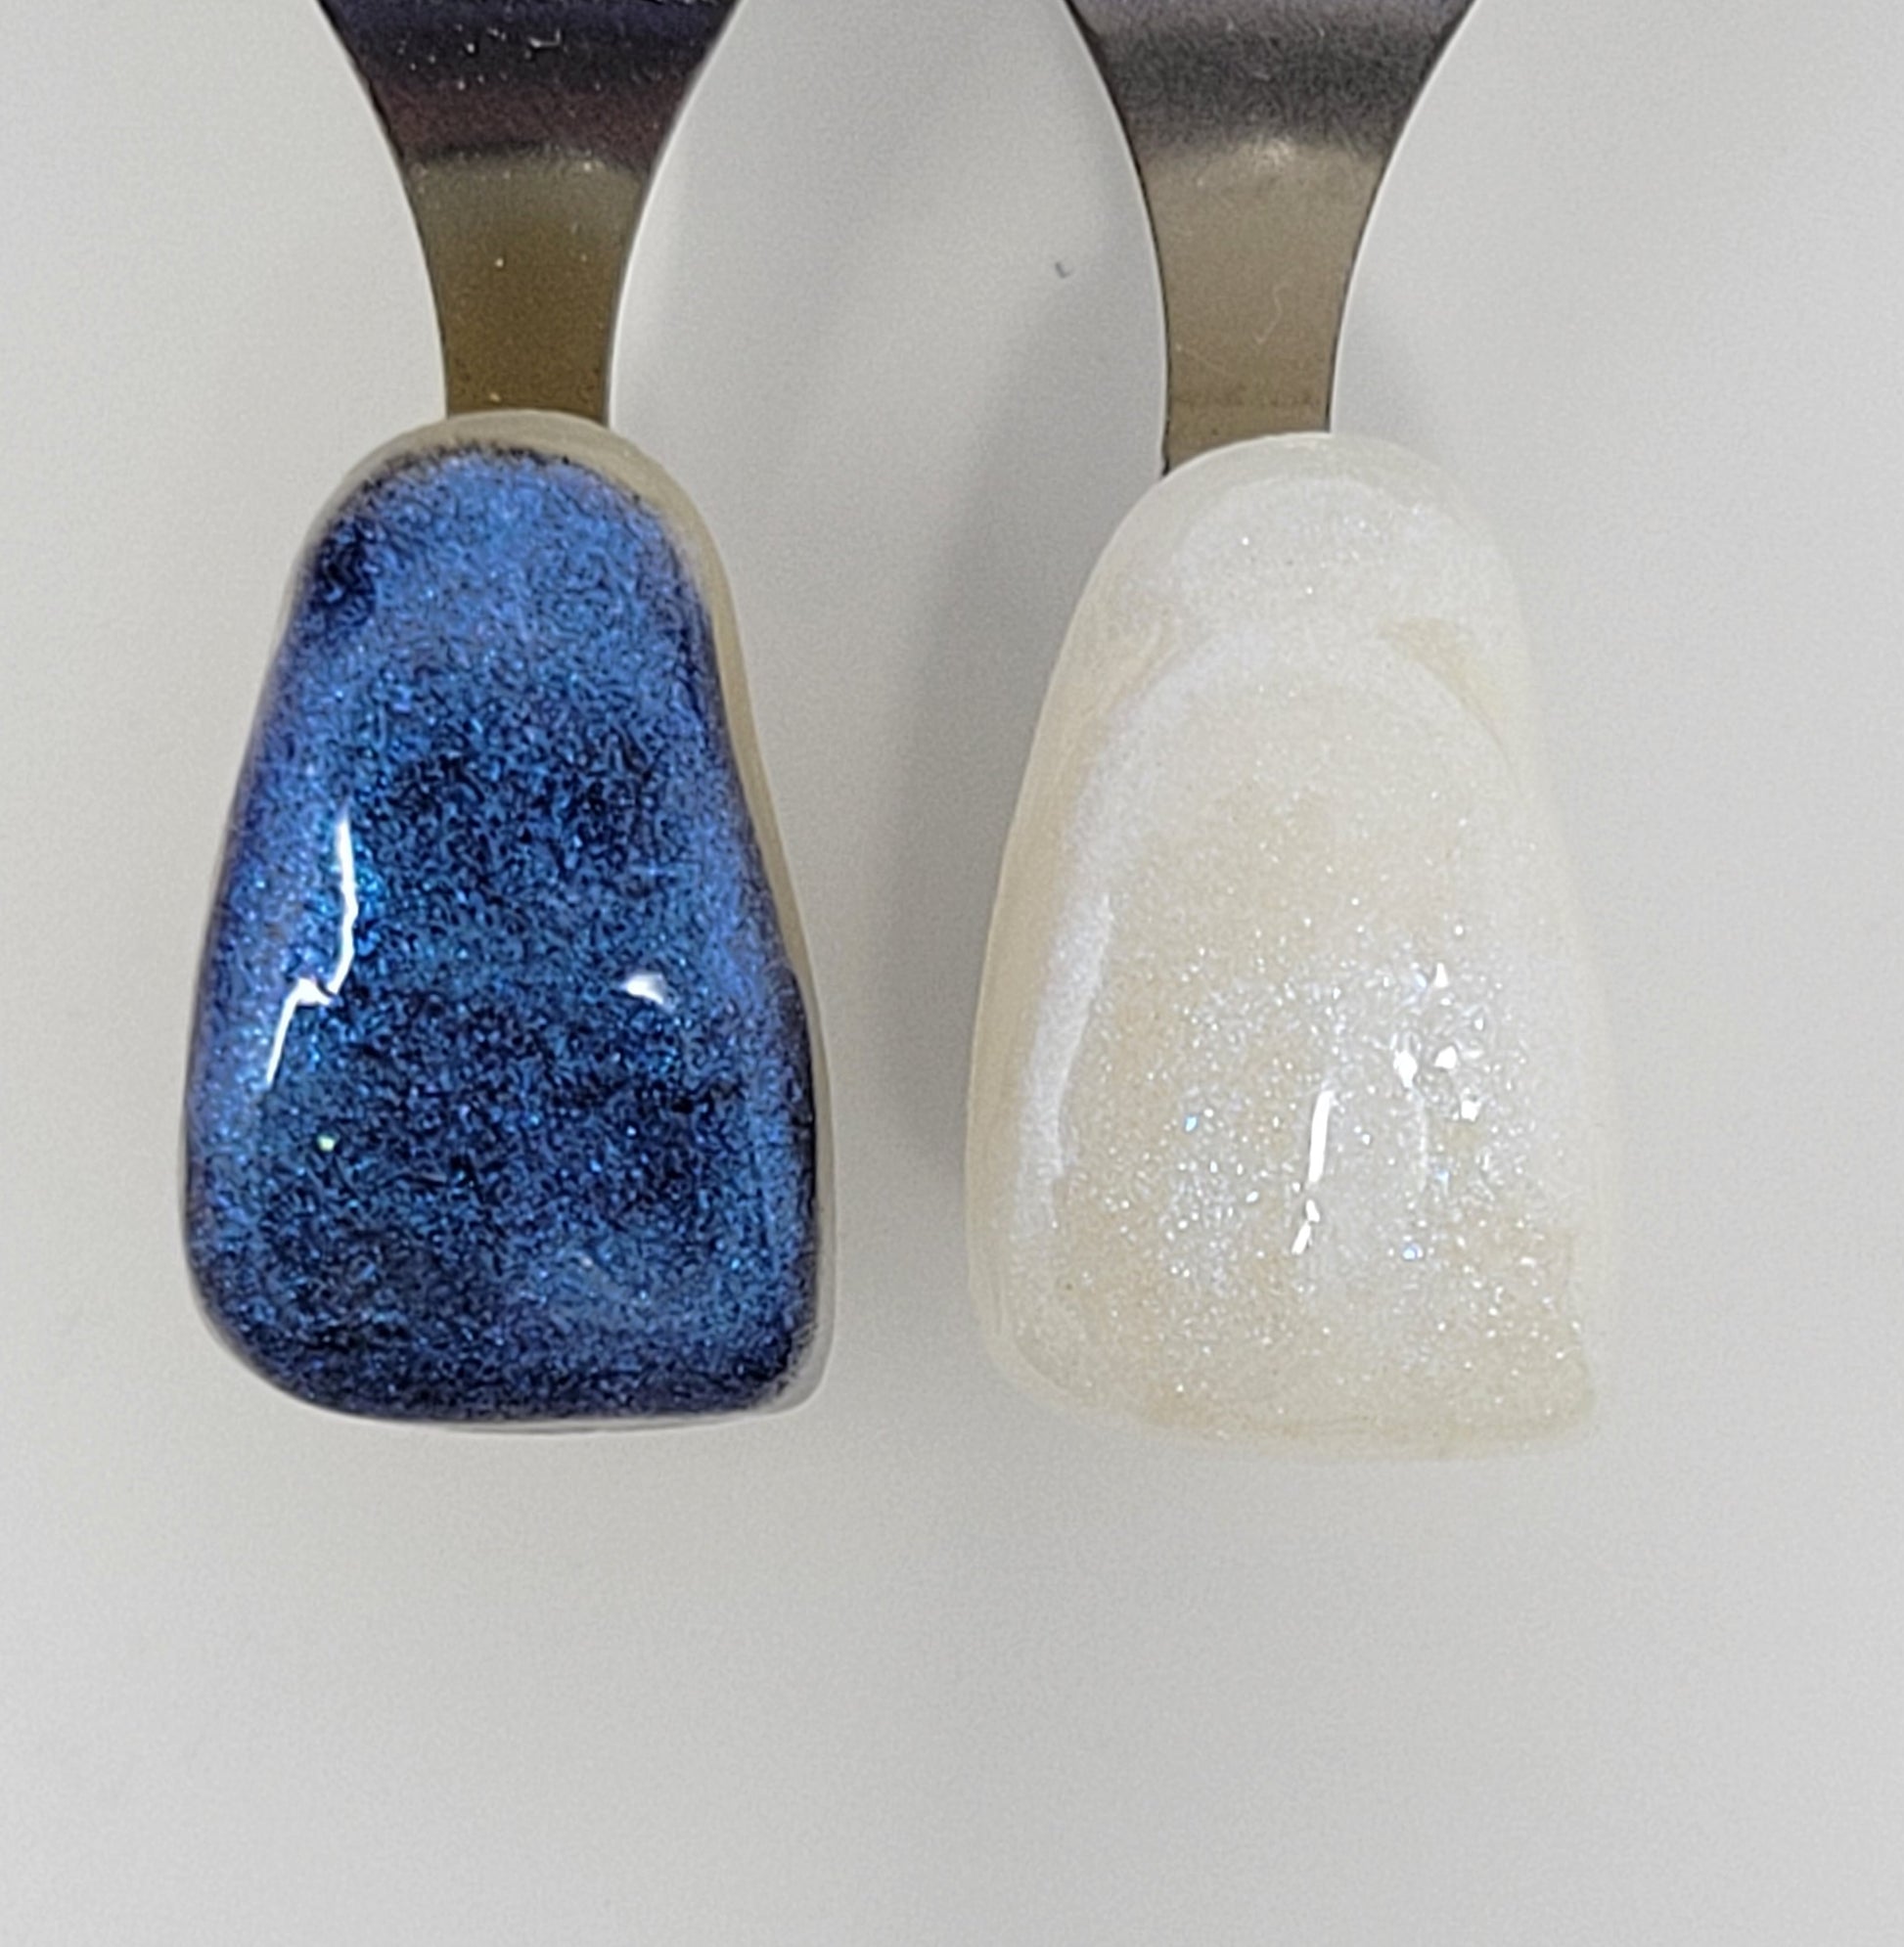 Light Blue Galaxy Temporary Tattooth Colorant on a demo tooth.  These colorants can be applied to teeth to temporarily alter their color or iridescence.